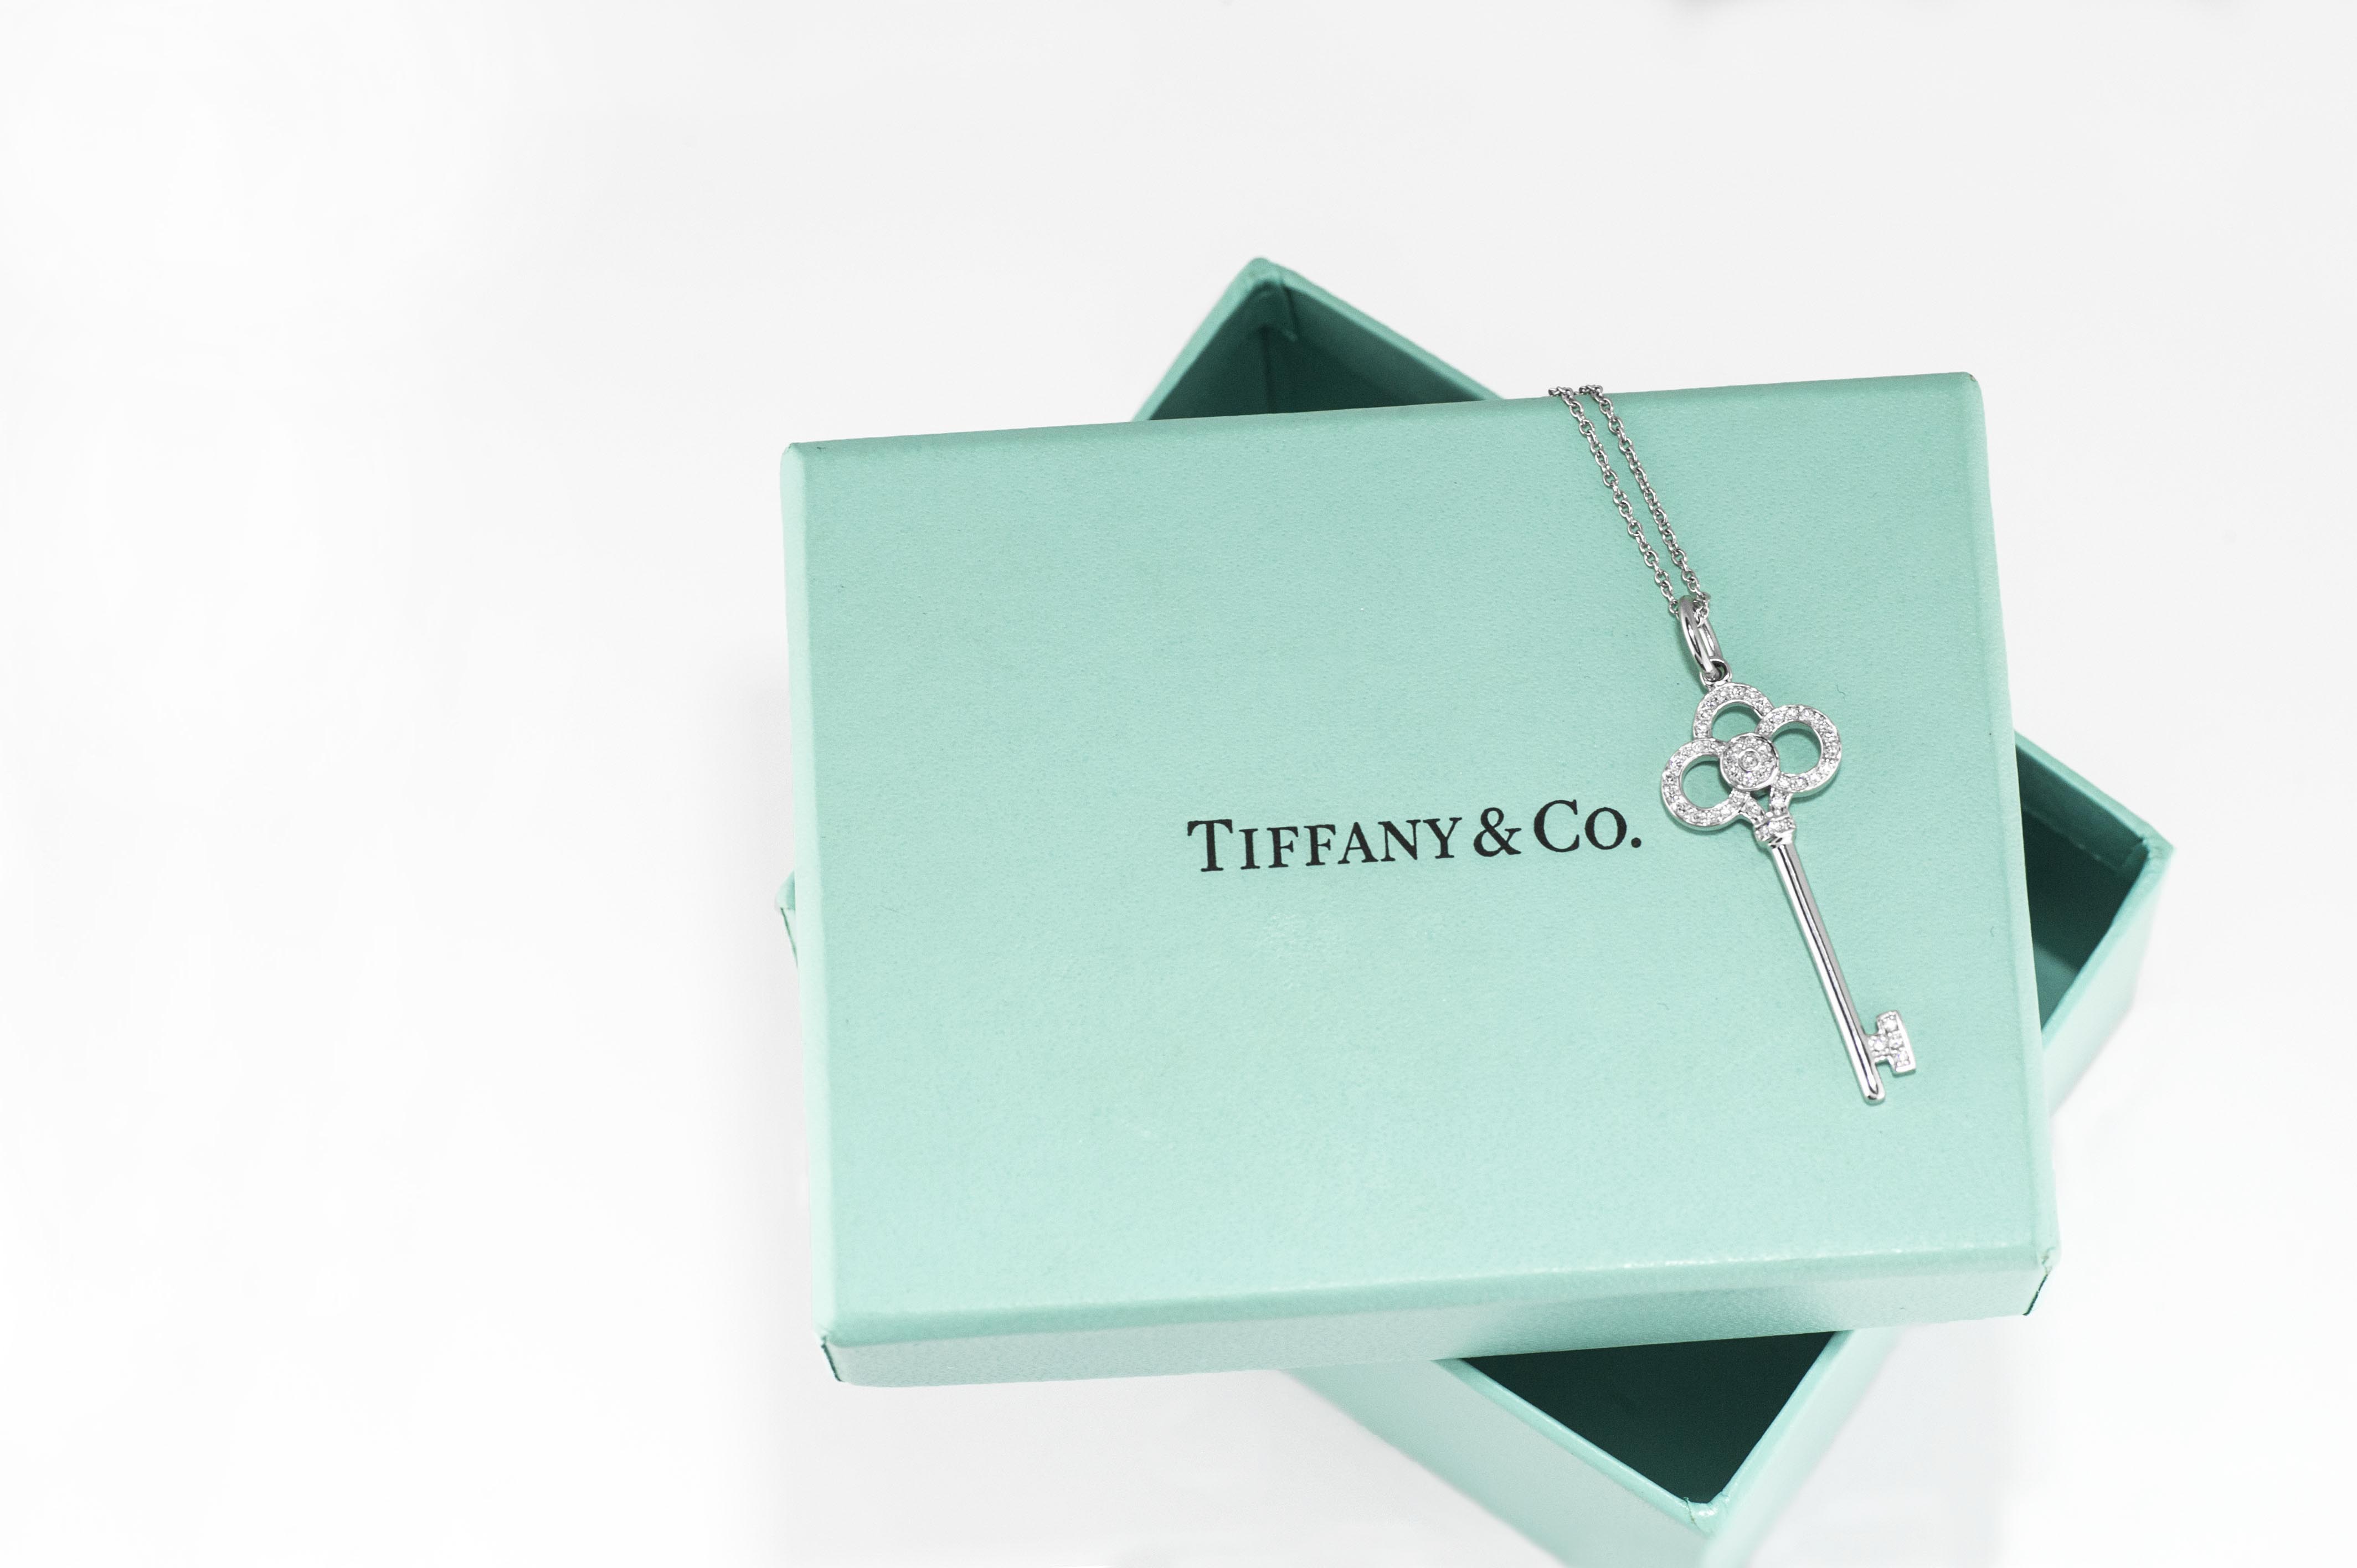 Tiffany \u0026 Co.: 10 Fascinating Facts You 